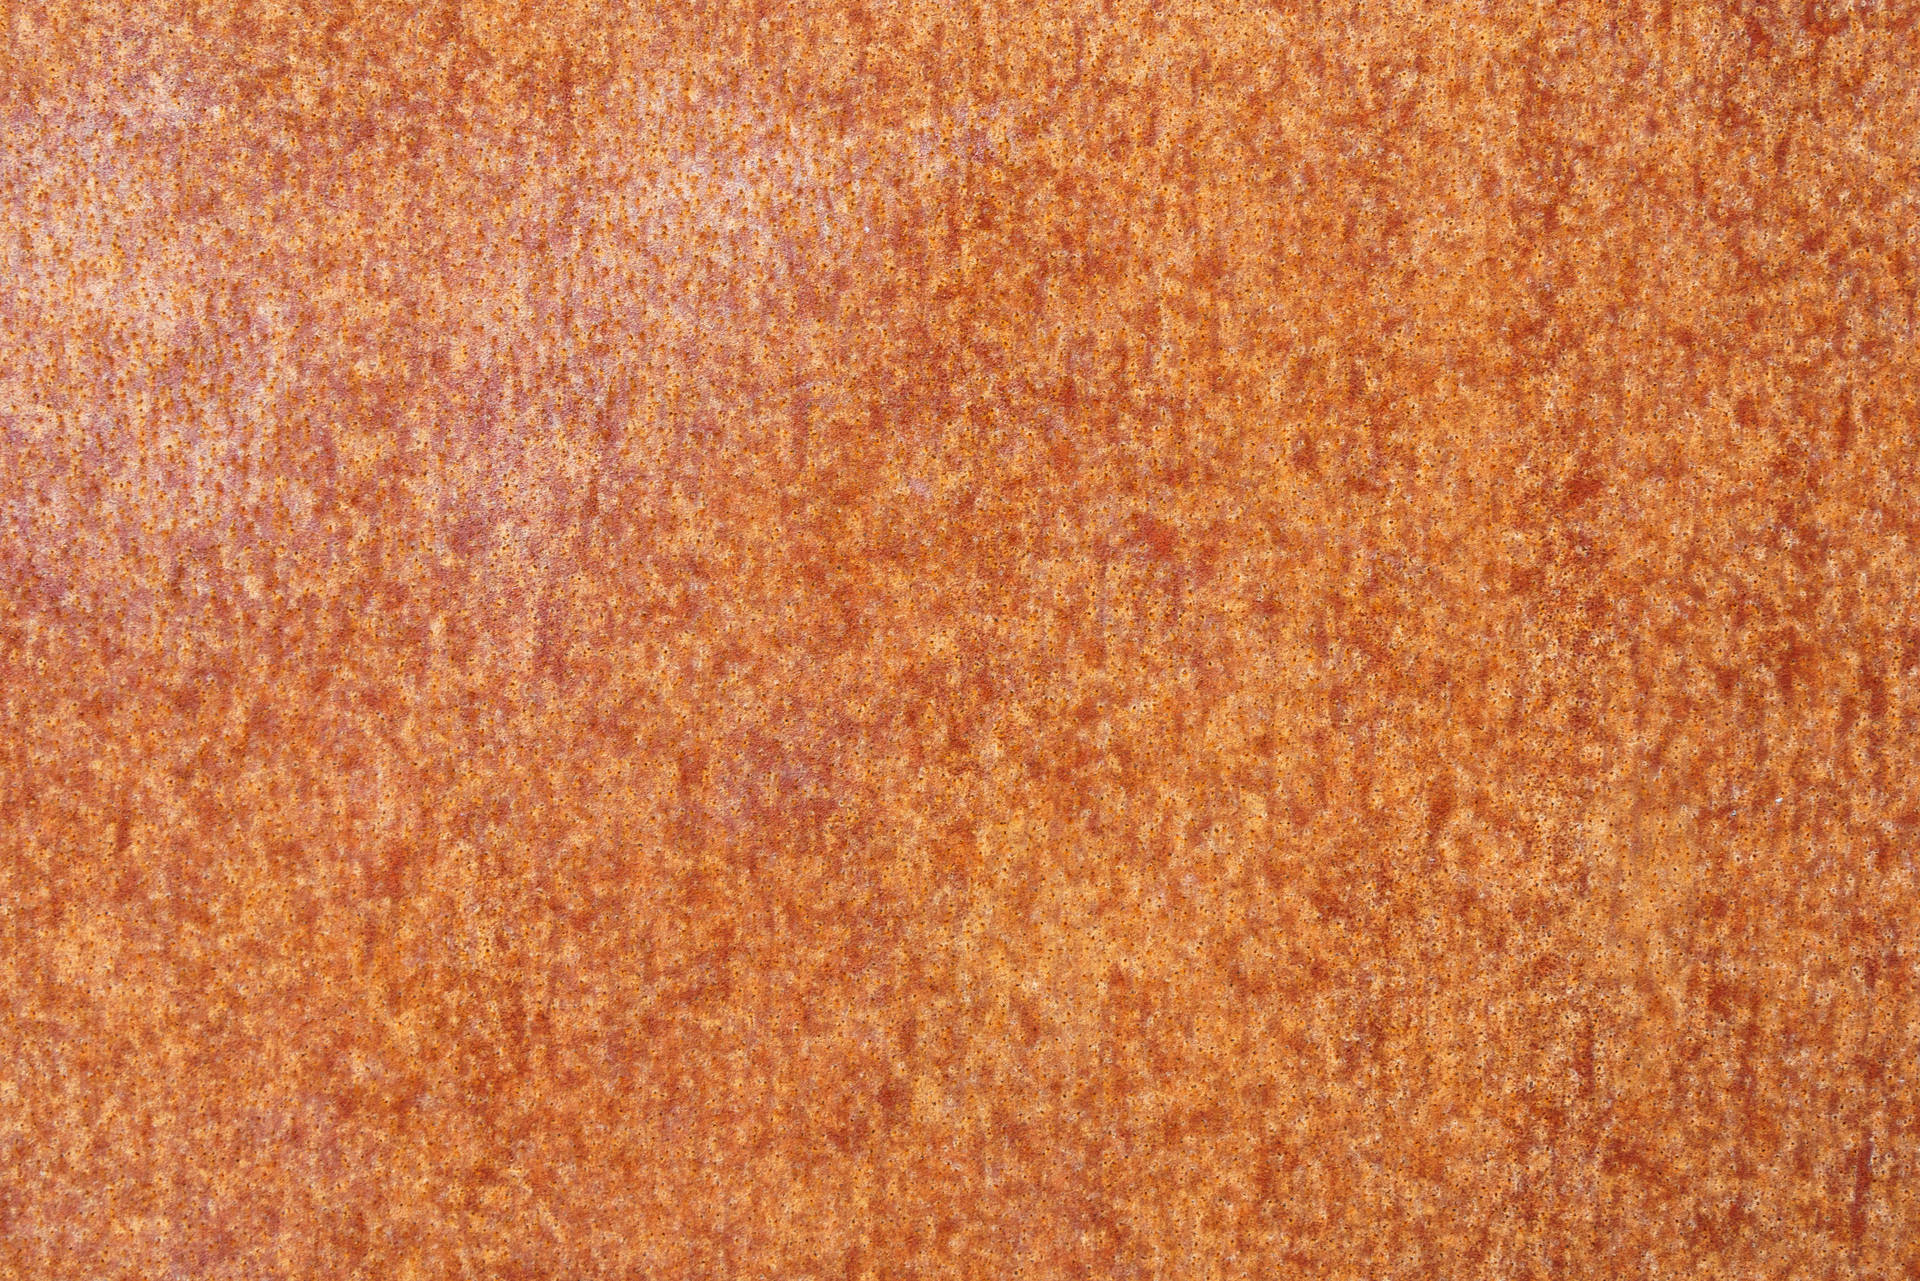 7952X5304 Textured Wallpaper and Background